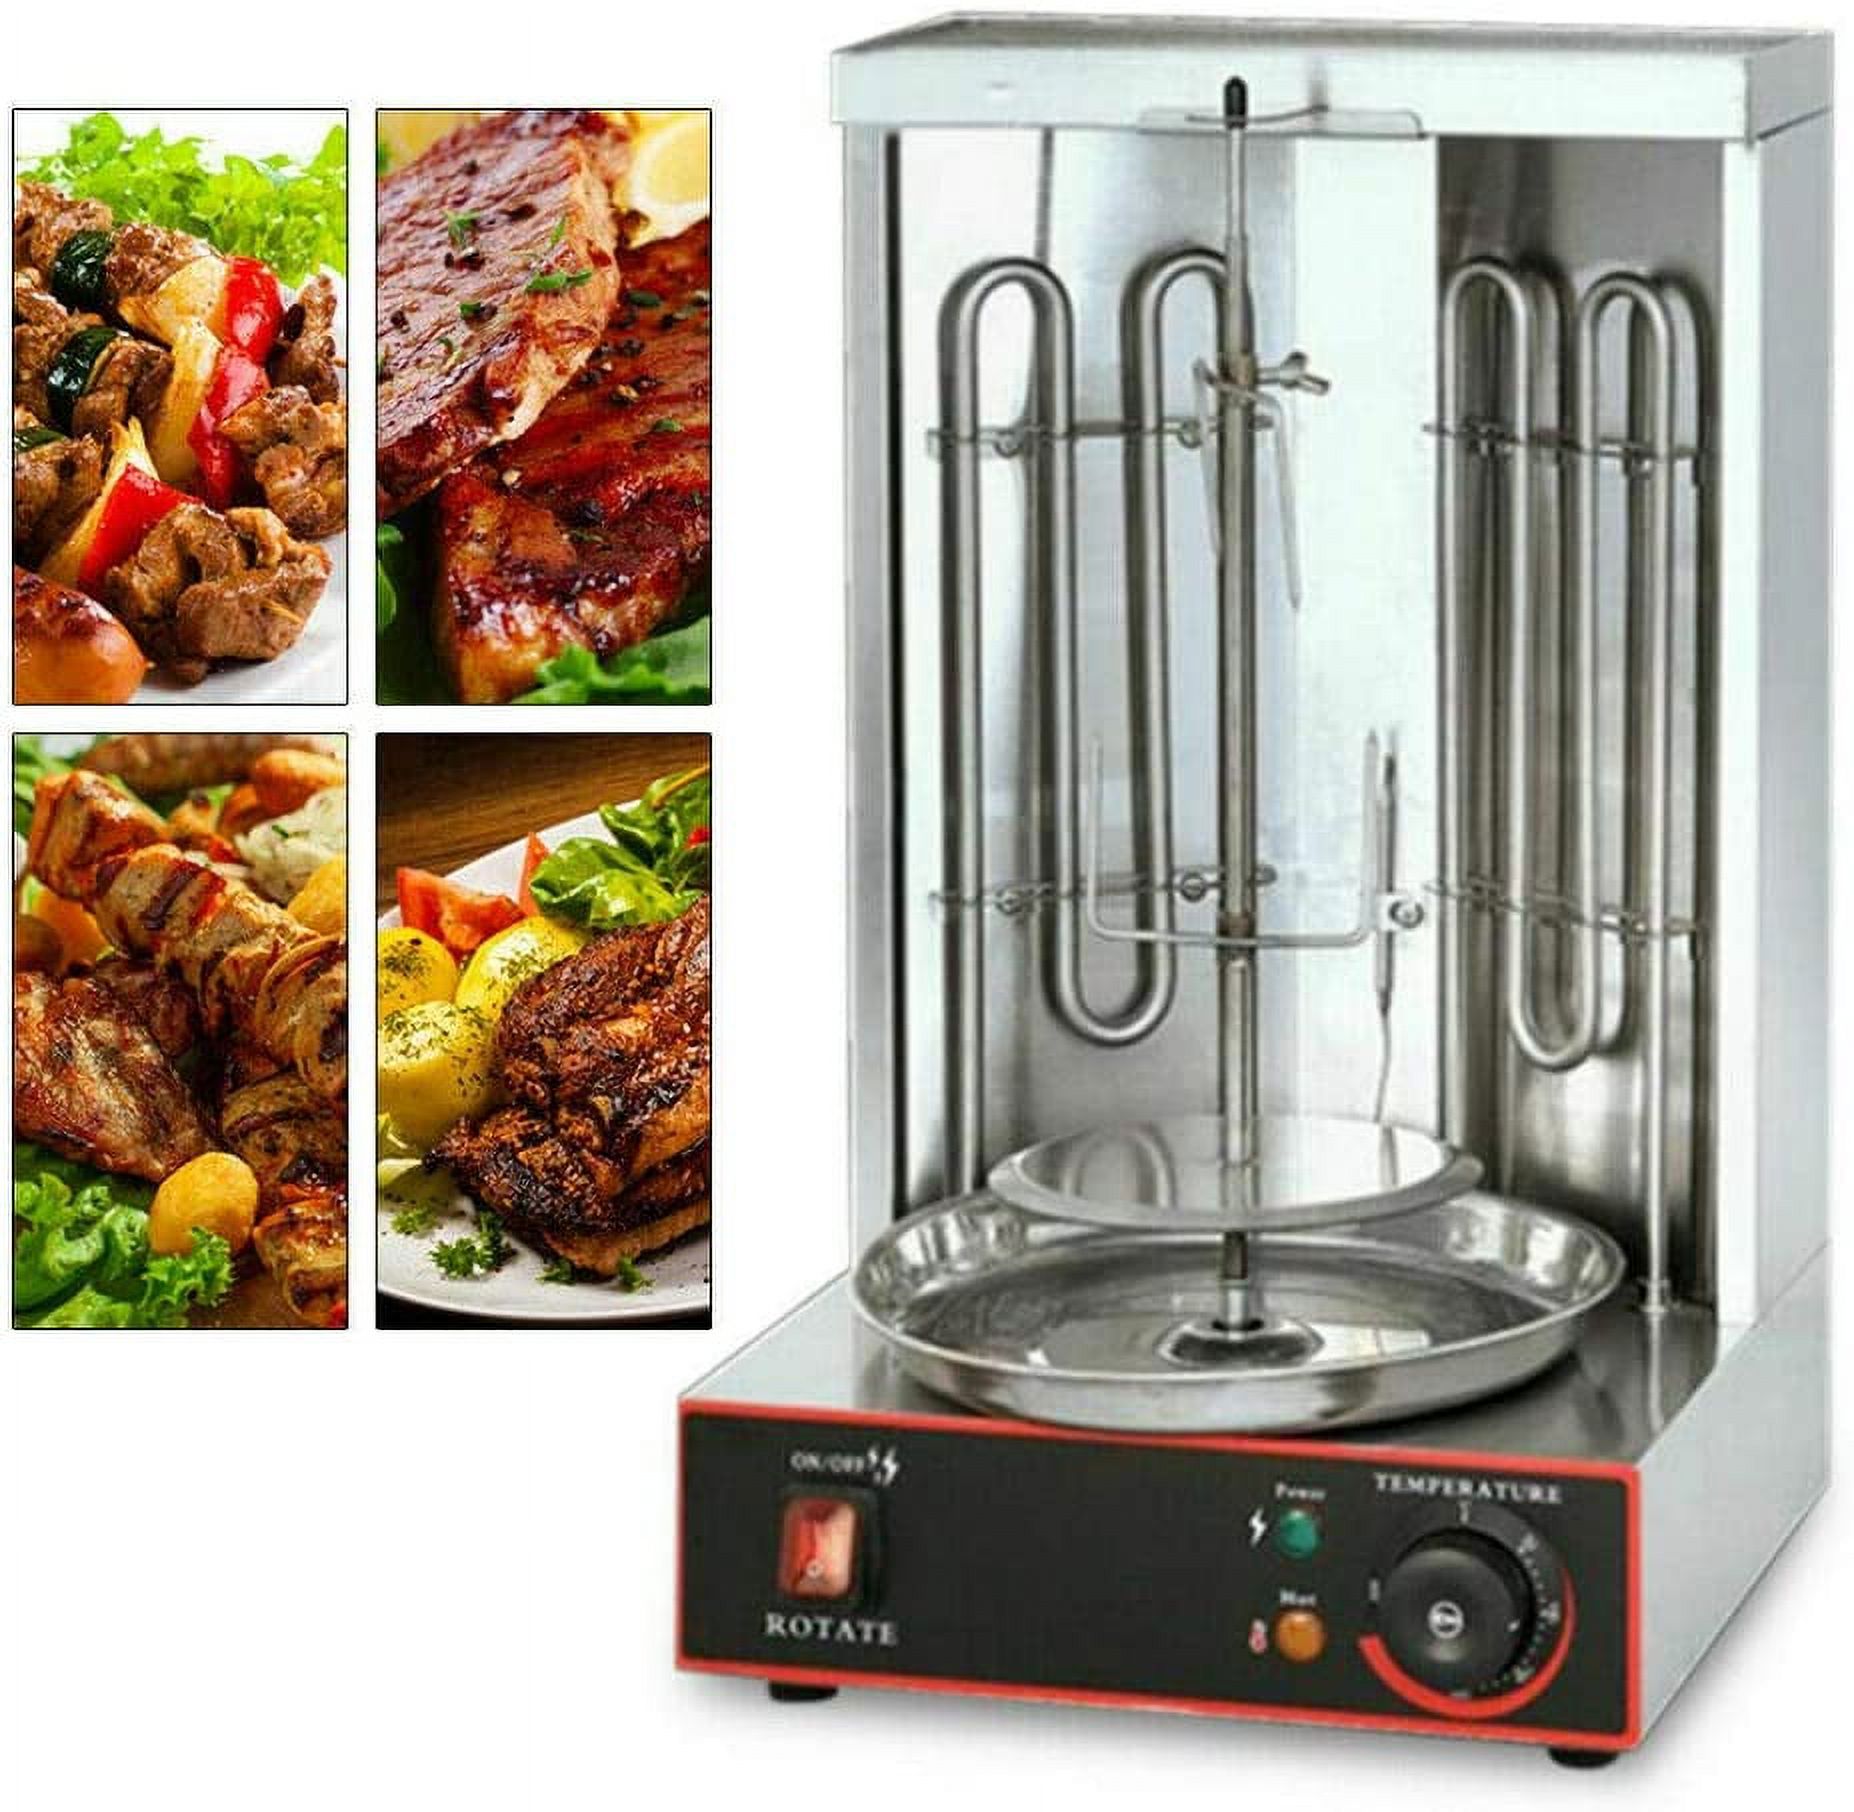 TFCFL Stainless Steel Rotating Kebab Maker Machine Barbecue Electric Heating Barbecue Grill Rotisserie Oven Automatic Rotating Machine Barbecue Oven - image 1 of 6